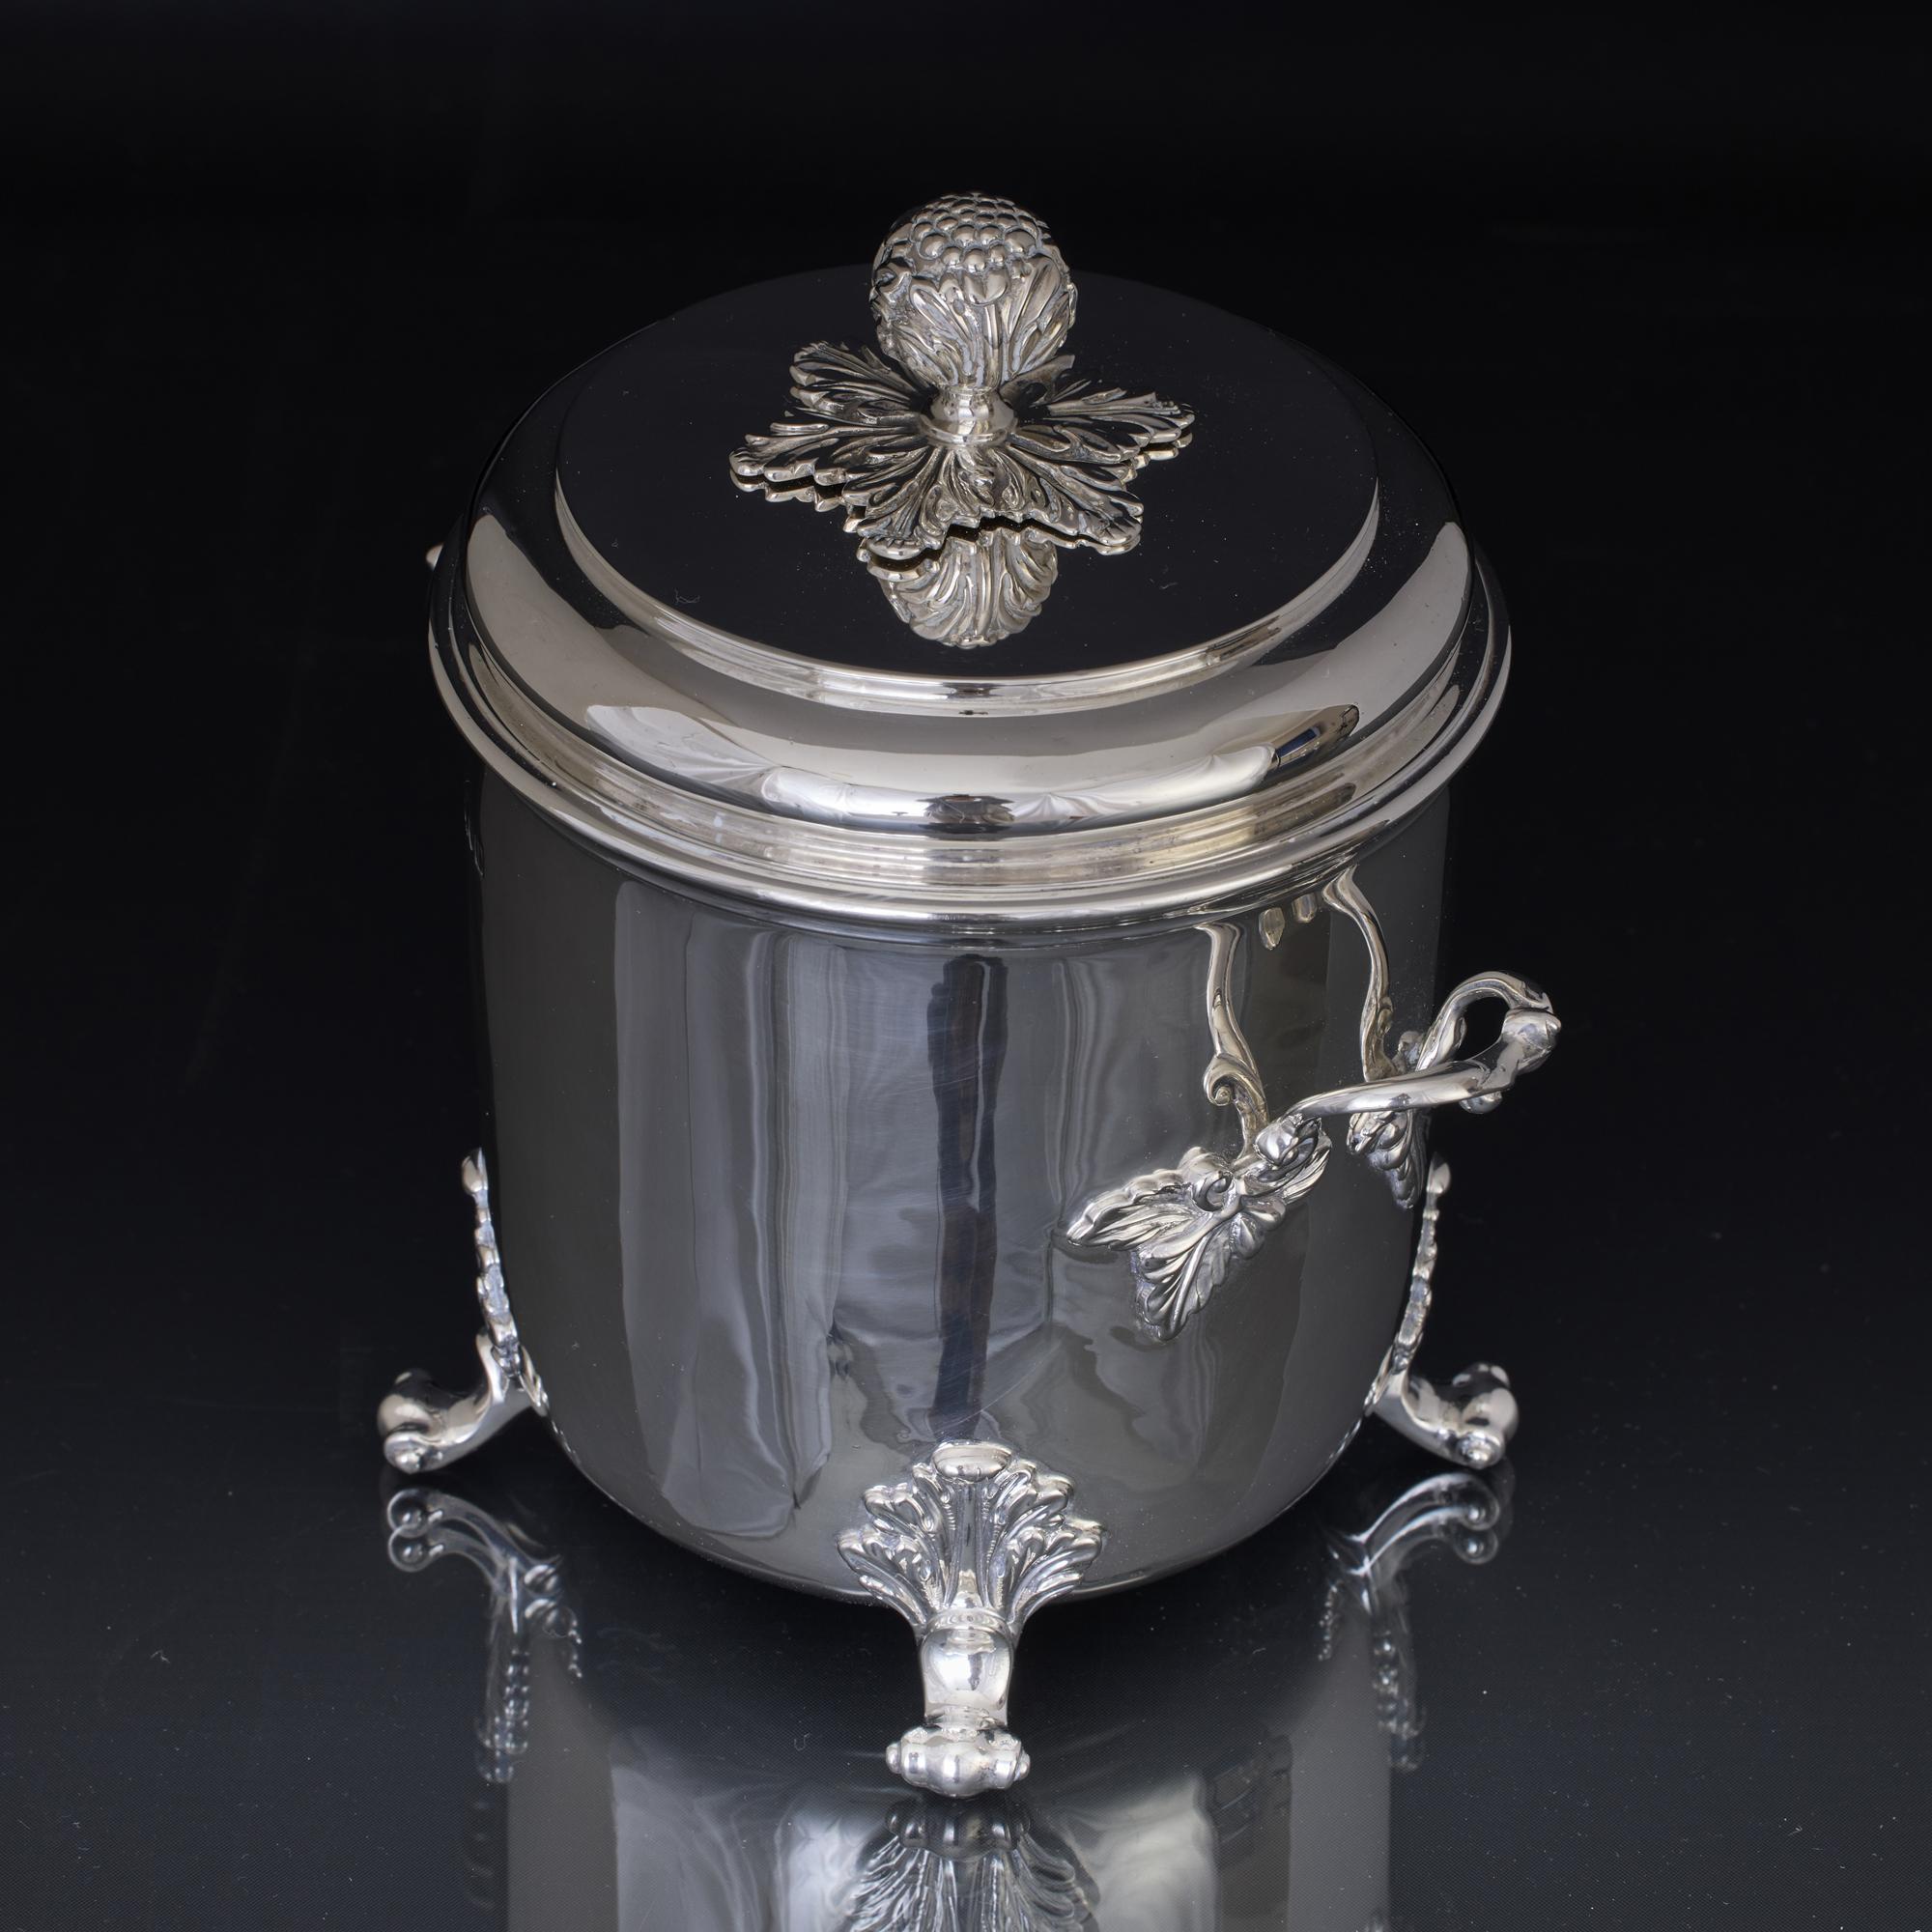 Substantial two-handled, cylindrical, antique silver container with a pull off cover and mounted on four cast scroll and acanthus leaf supports. The two cast handles are fittted to the box with decorative leaf fastenings, while the cover has a